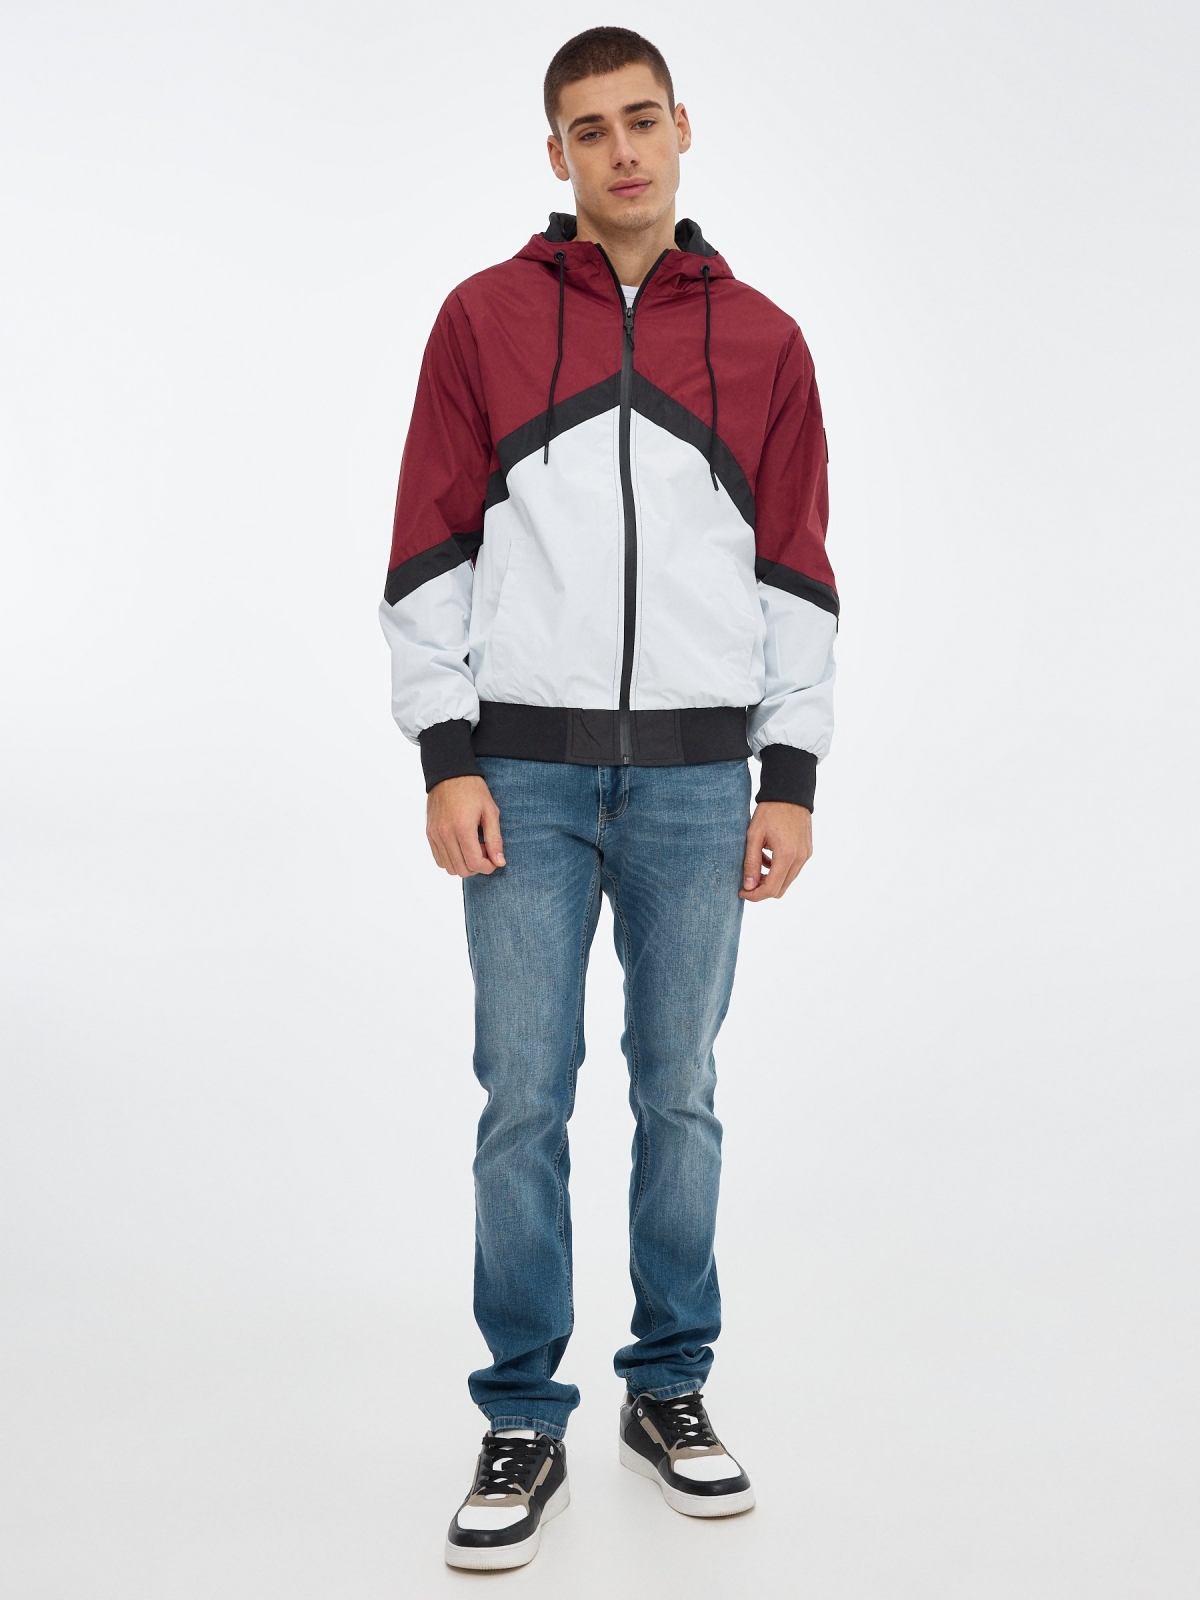 Lightweight hooded jacket white front view